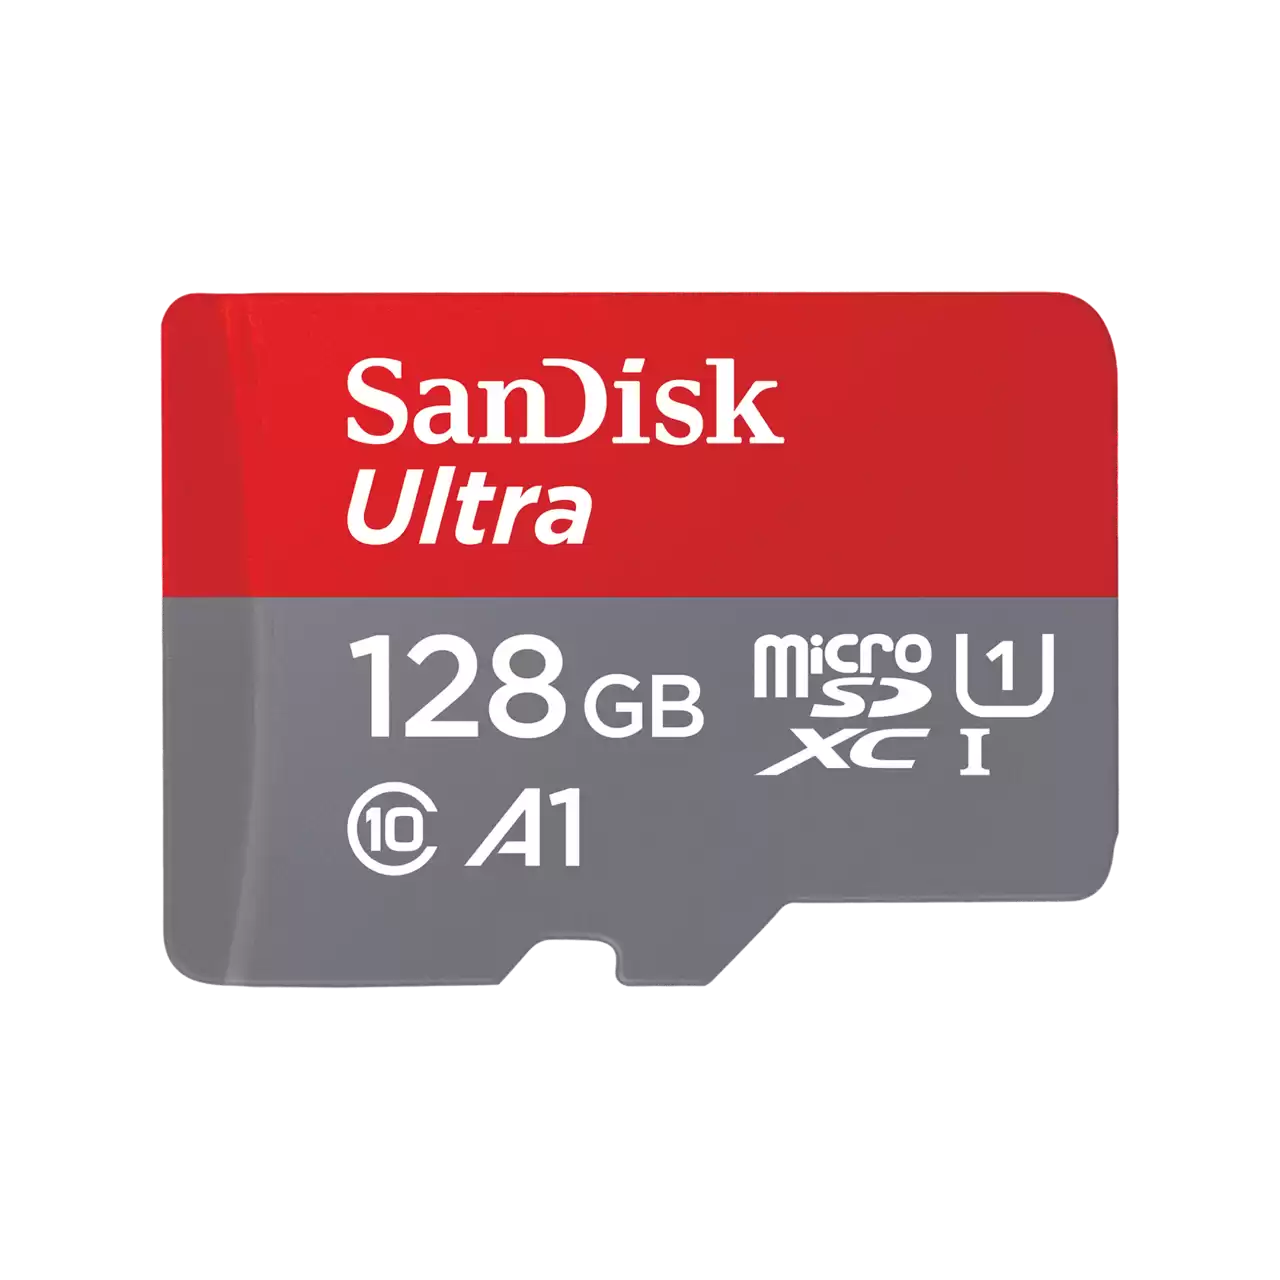 SanDisk 128 GB Ultra Flash Memory Card MicroSDXC - A1 / UHS Class 1 / Class10 (SD Adapter Included)